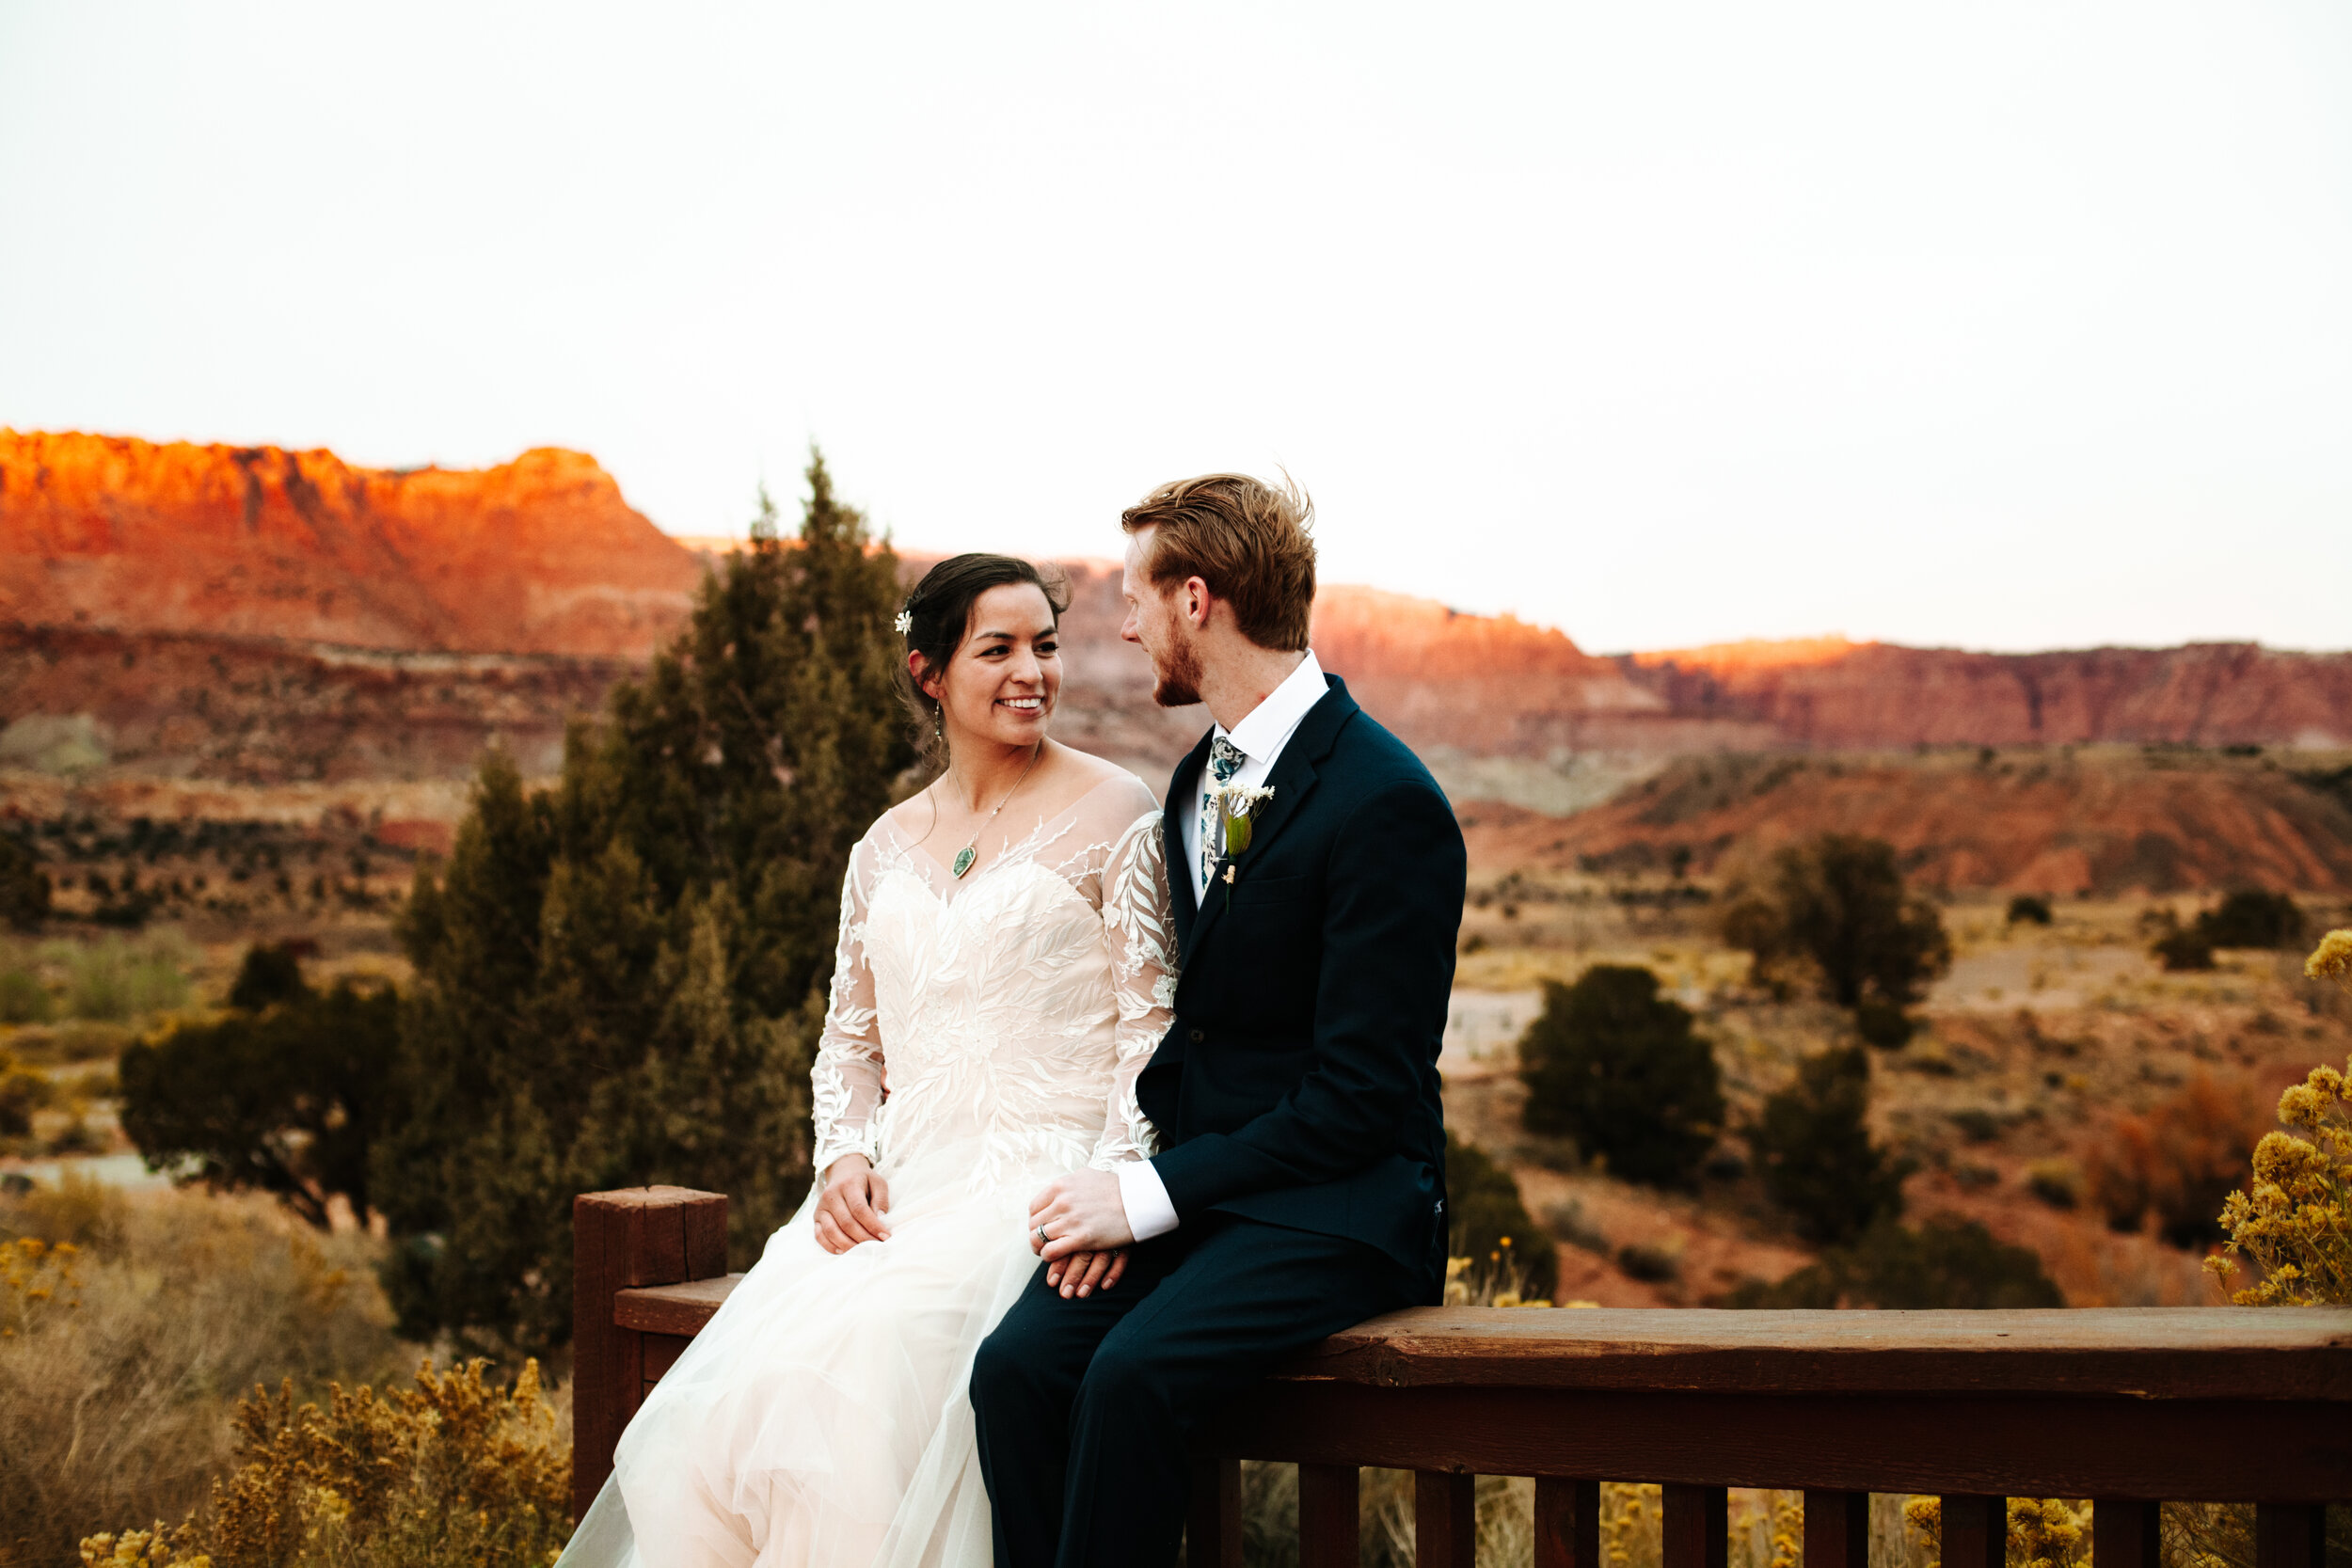 Couple looking at each other at their fall wedding in Moab, Utah.